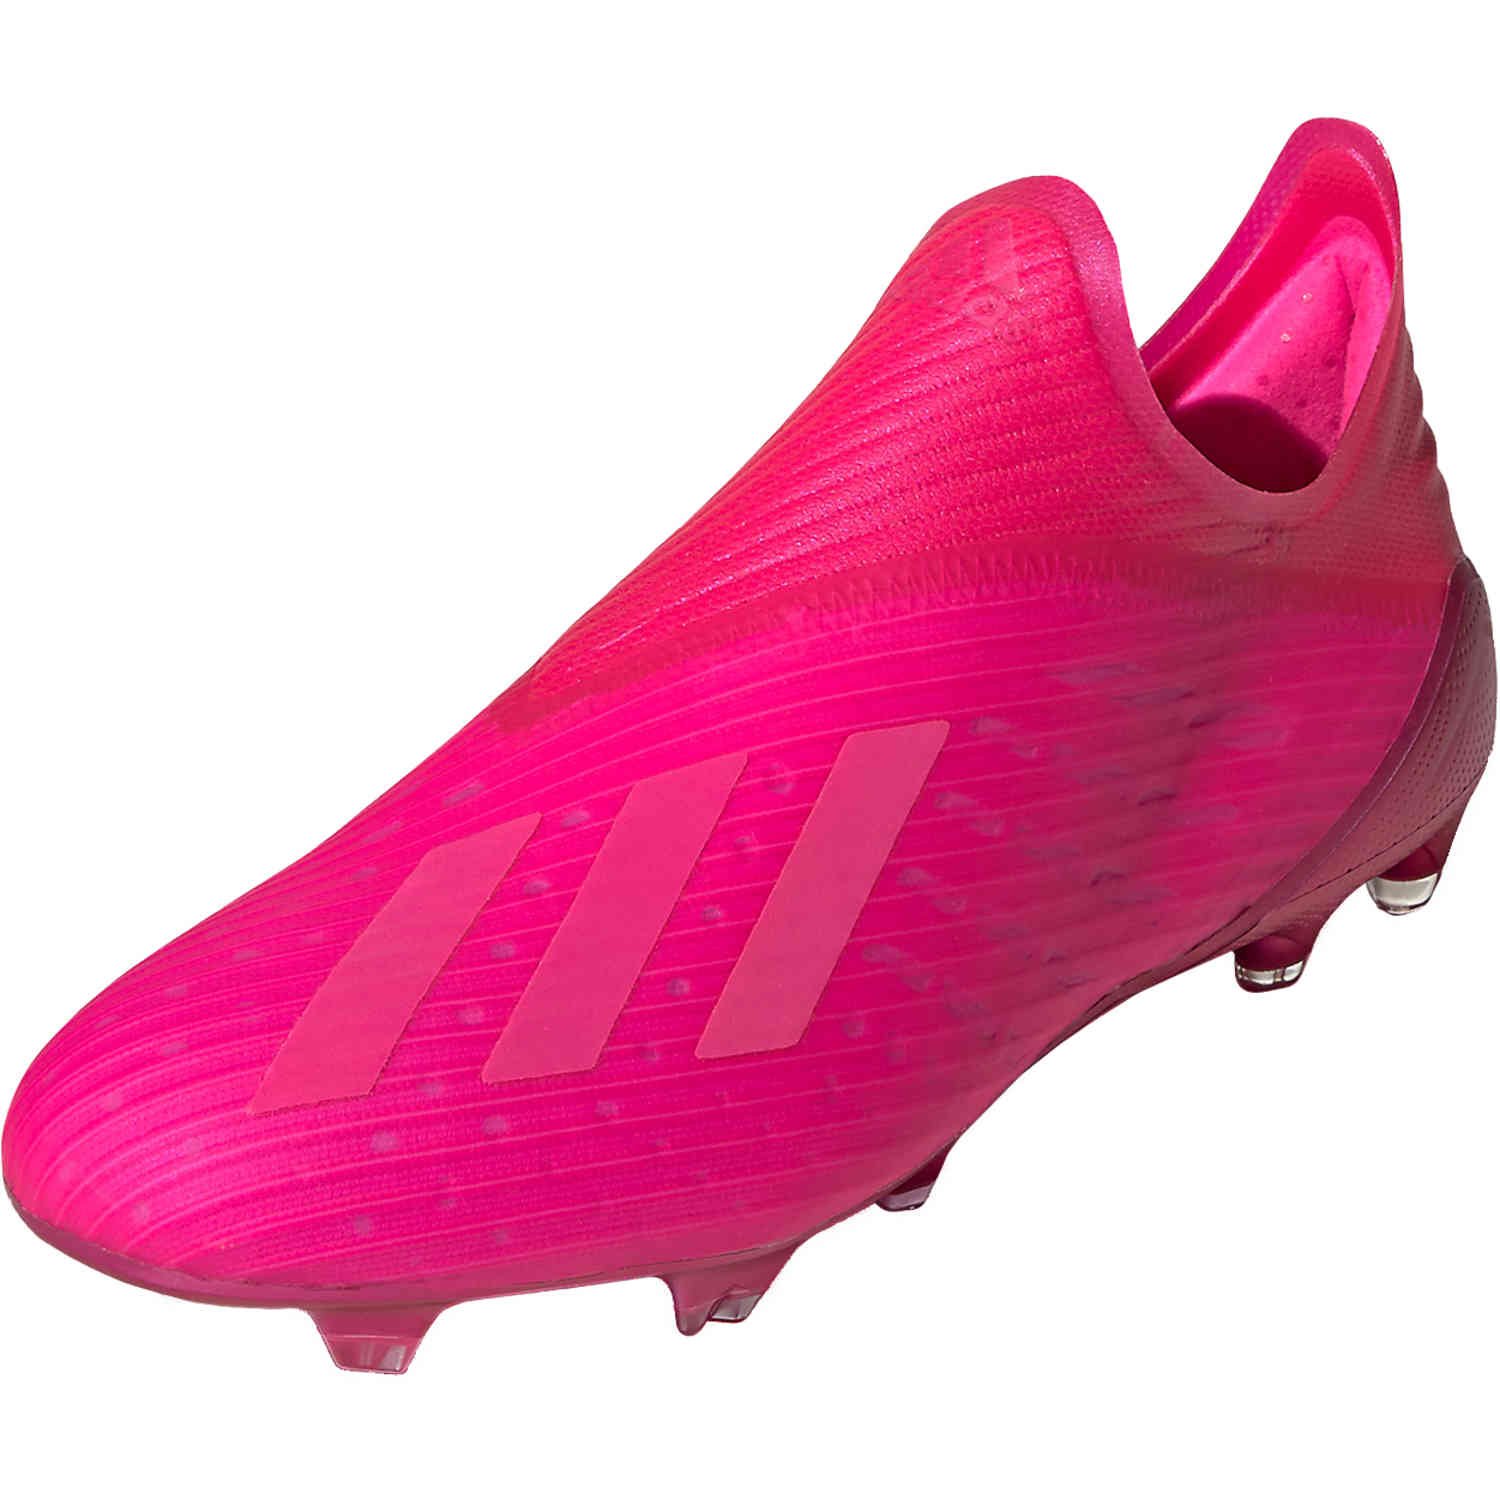 x19 soccer cleats